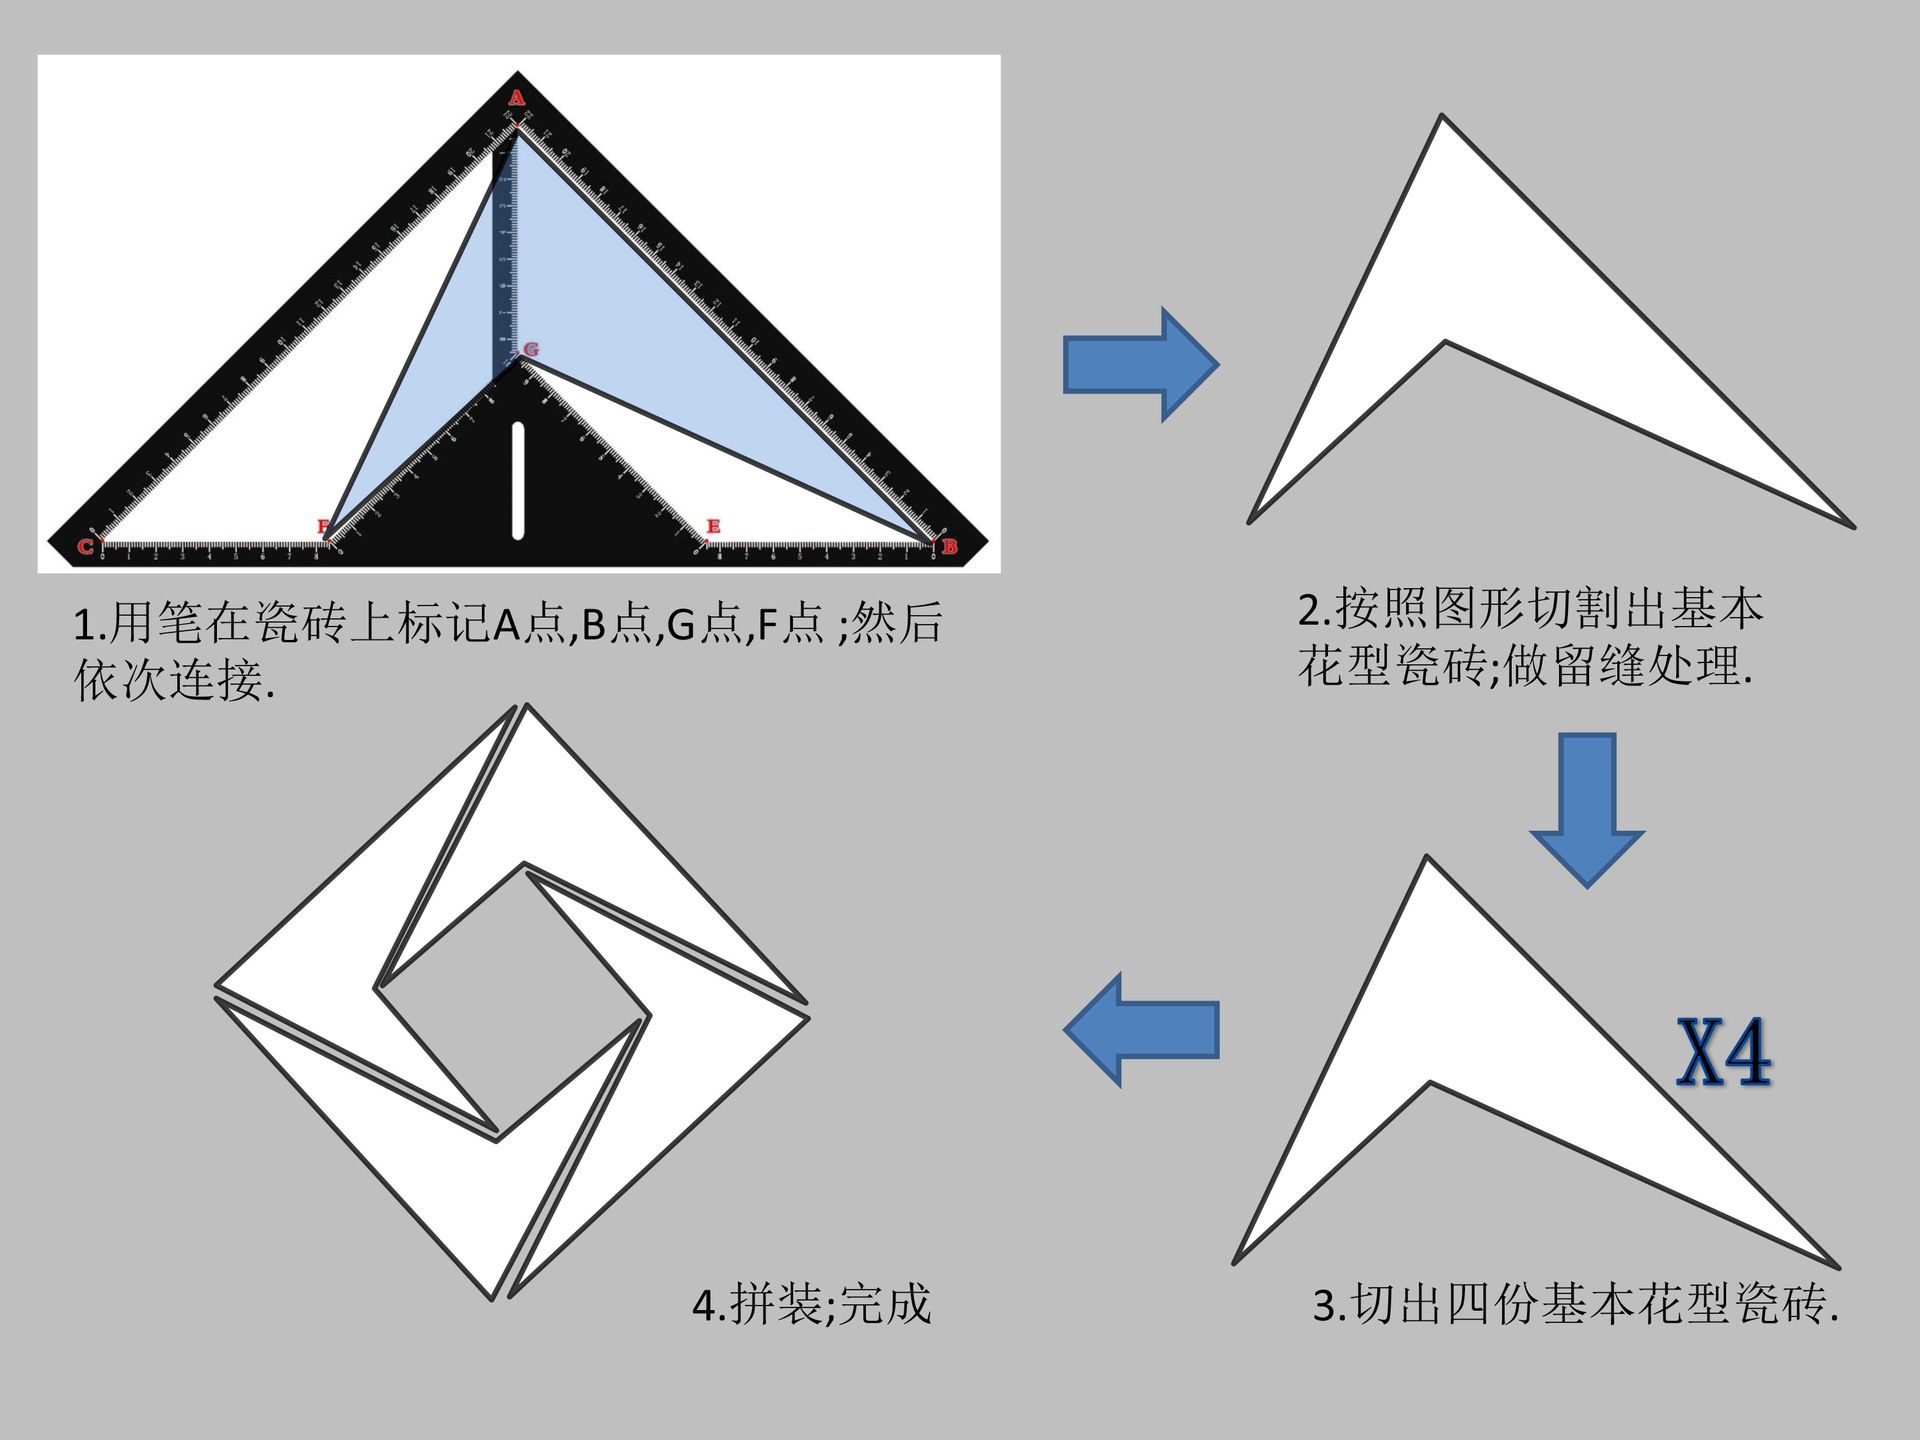 35cm-Angle-Ruler-Metric-Aluminum-Alloy-Triangular-Measuring-Ruler-Woodwork-Speed-Square-Triangle-Ang-1532423